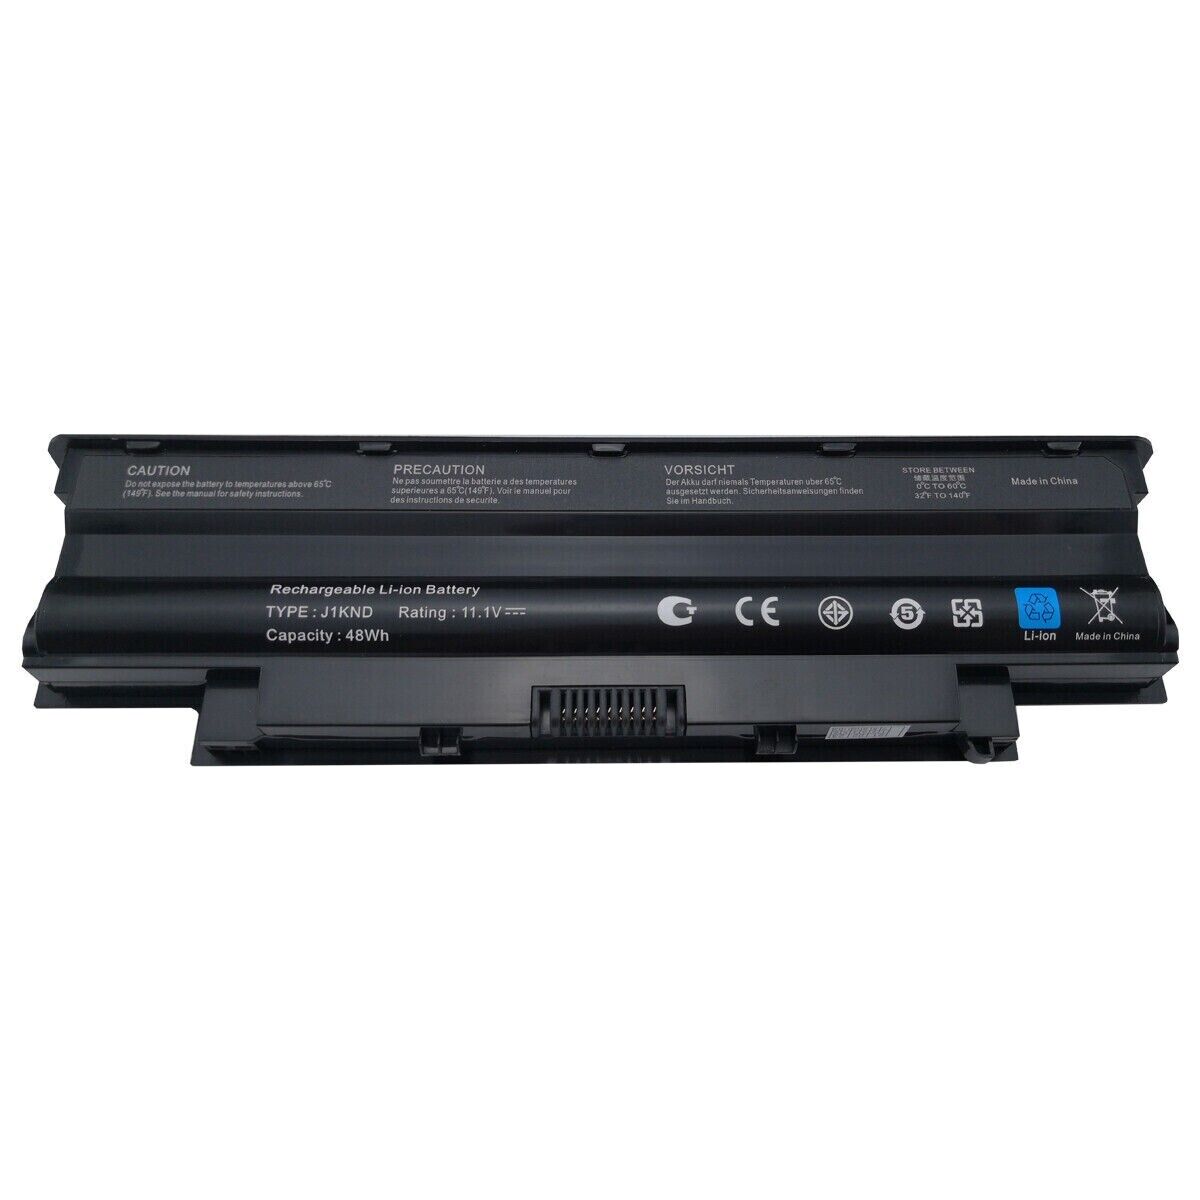 New OEM Battery J1KND For DELL Inspiron 3520 3420 M5030 N5110 N5050 N4010 N7110